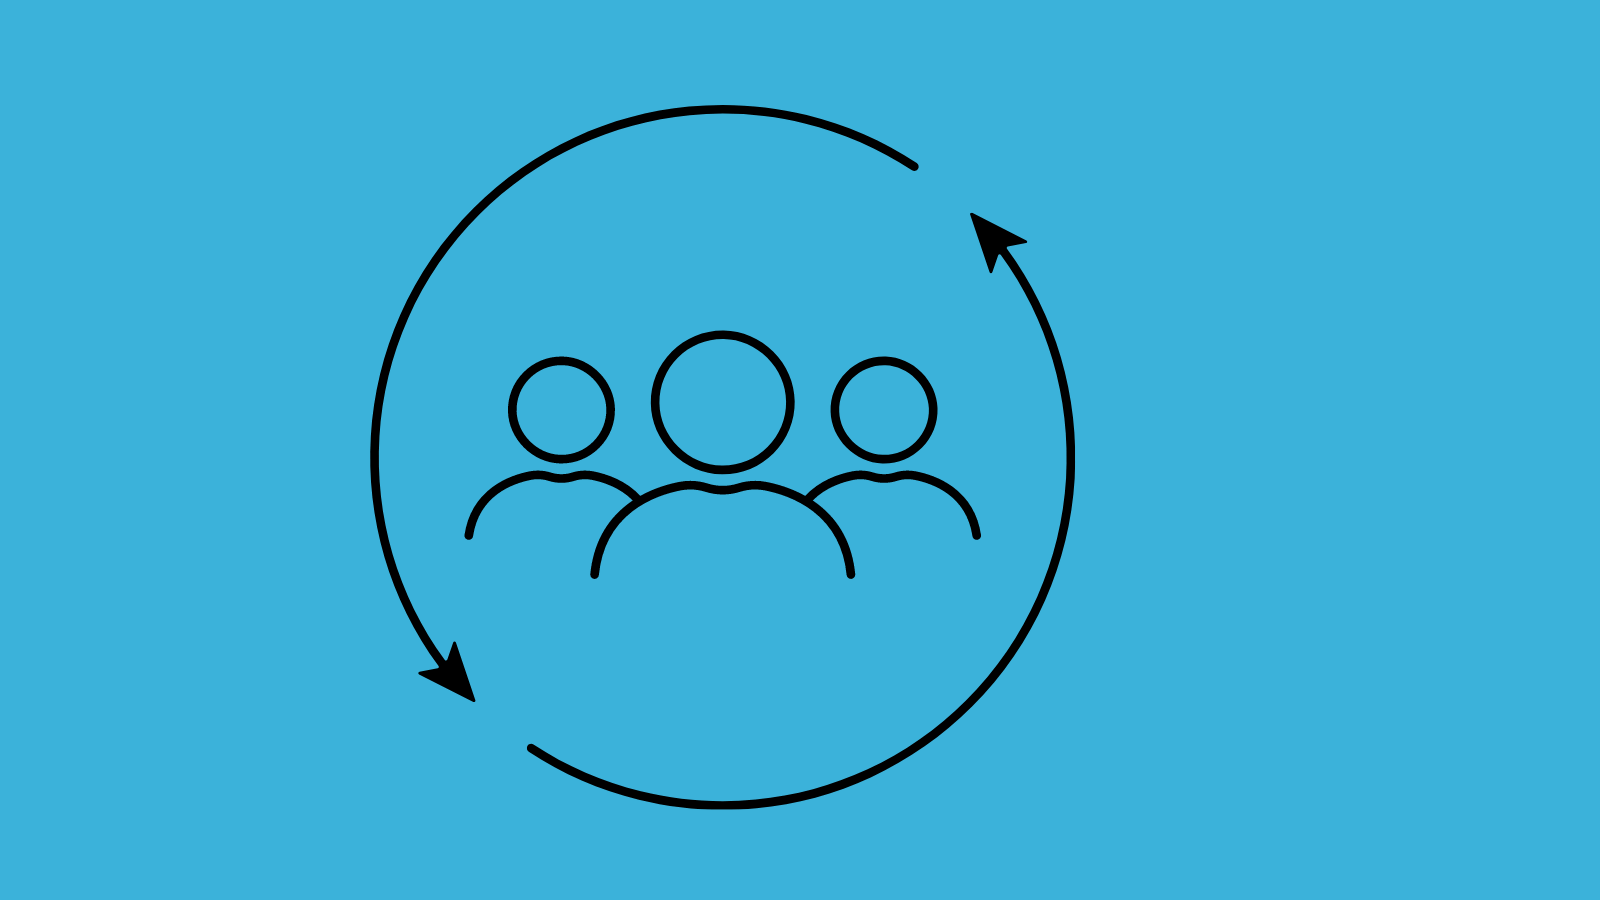 Three people with two arrows in a circle around them